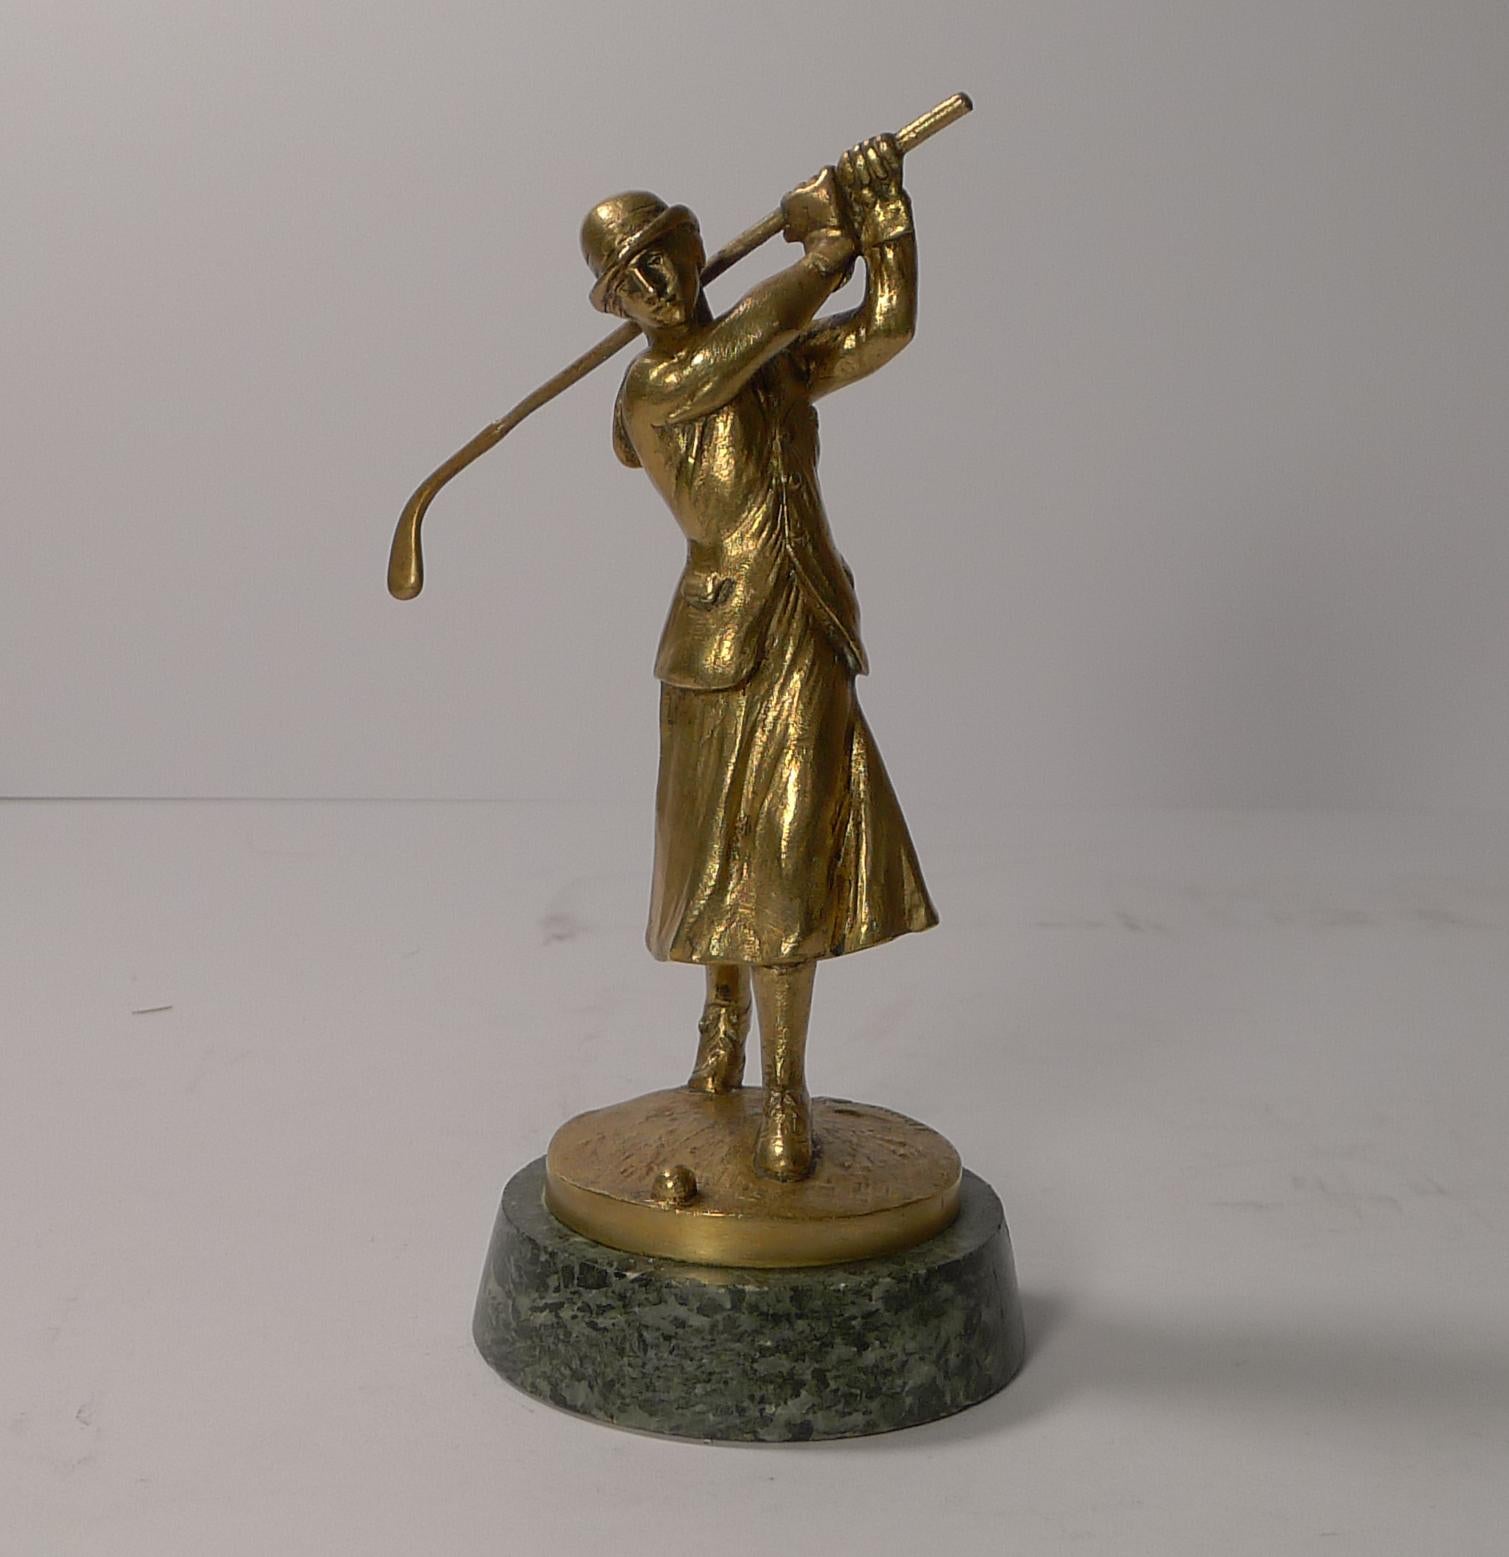 Art Deco Bronze Car Mascot in the from of a Lady Golfer, Jose Dunach For Sale 2